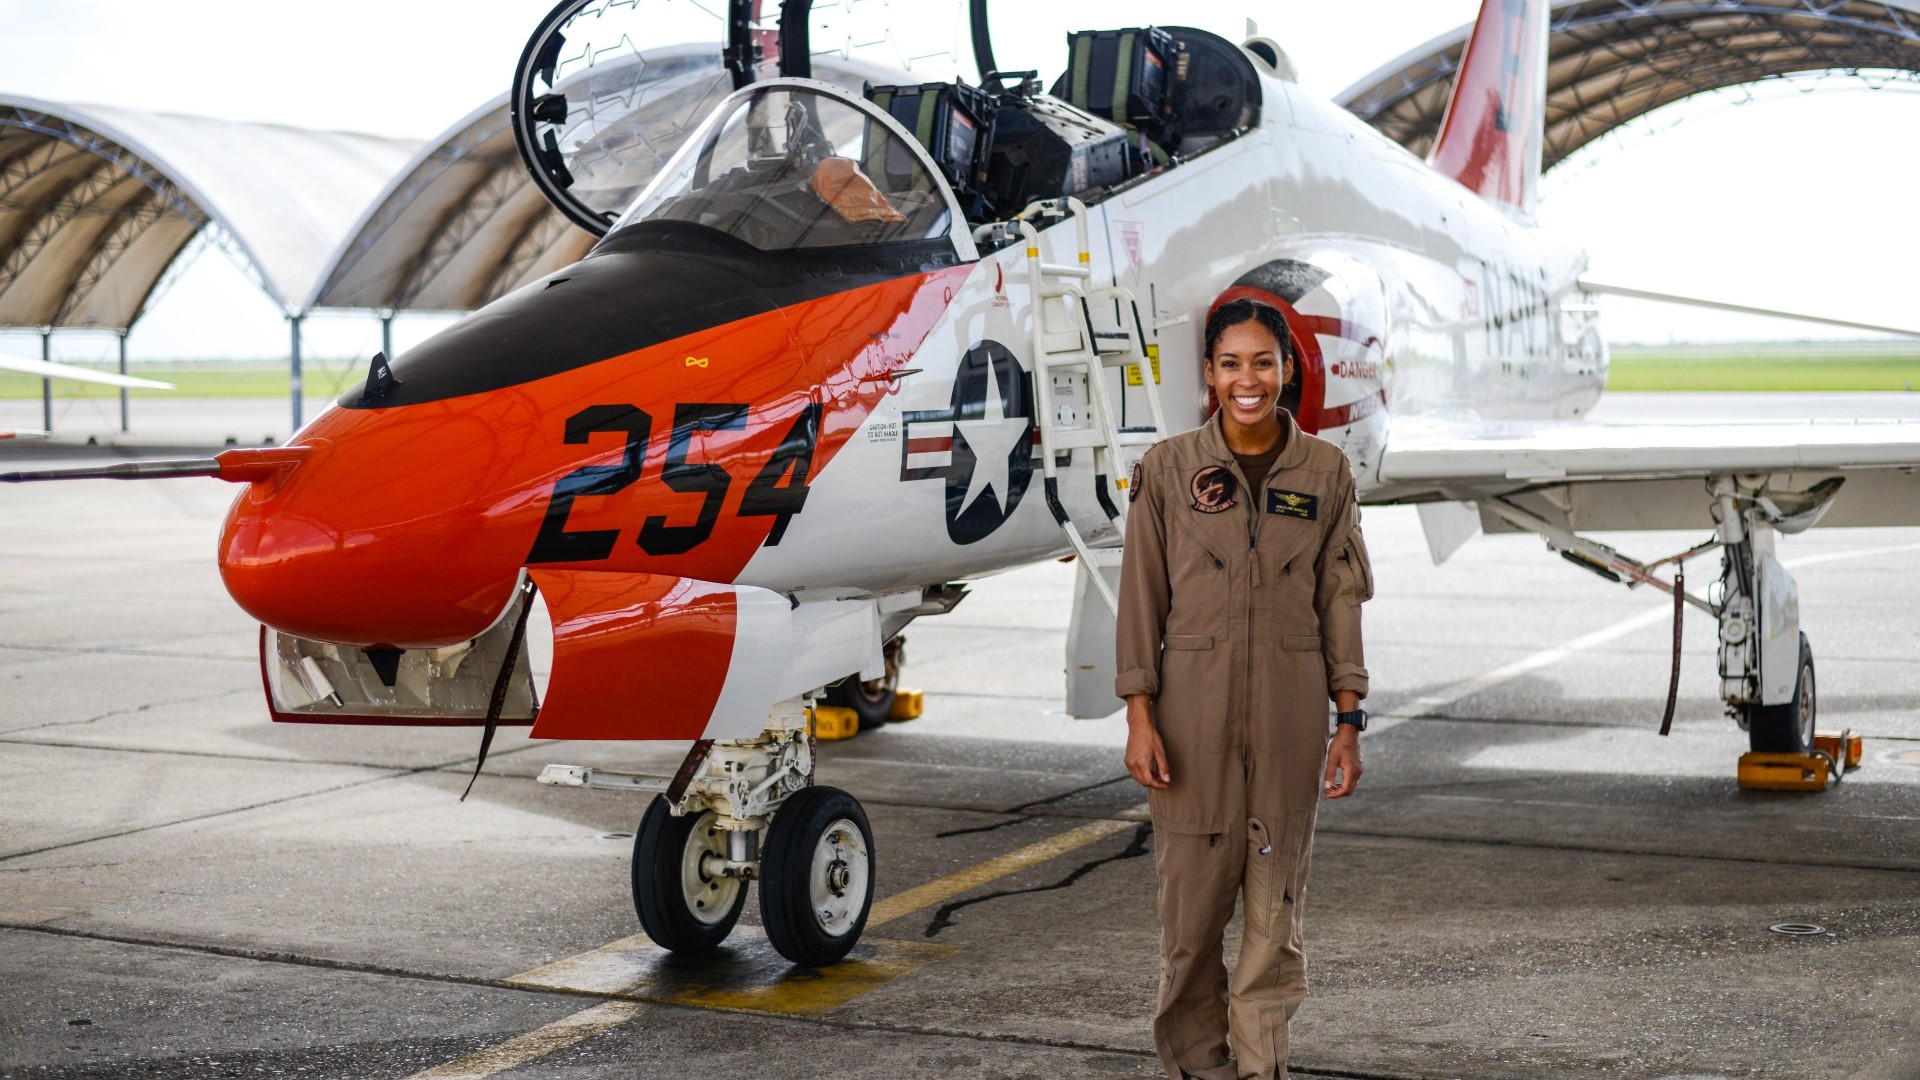 VIDEO CREDIT: U.S. Navy | The US Navy's first Black female tactical jet pilot gets her 'Wings of Gold' Friday